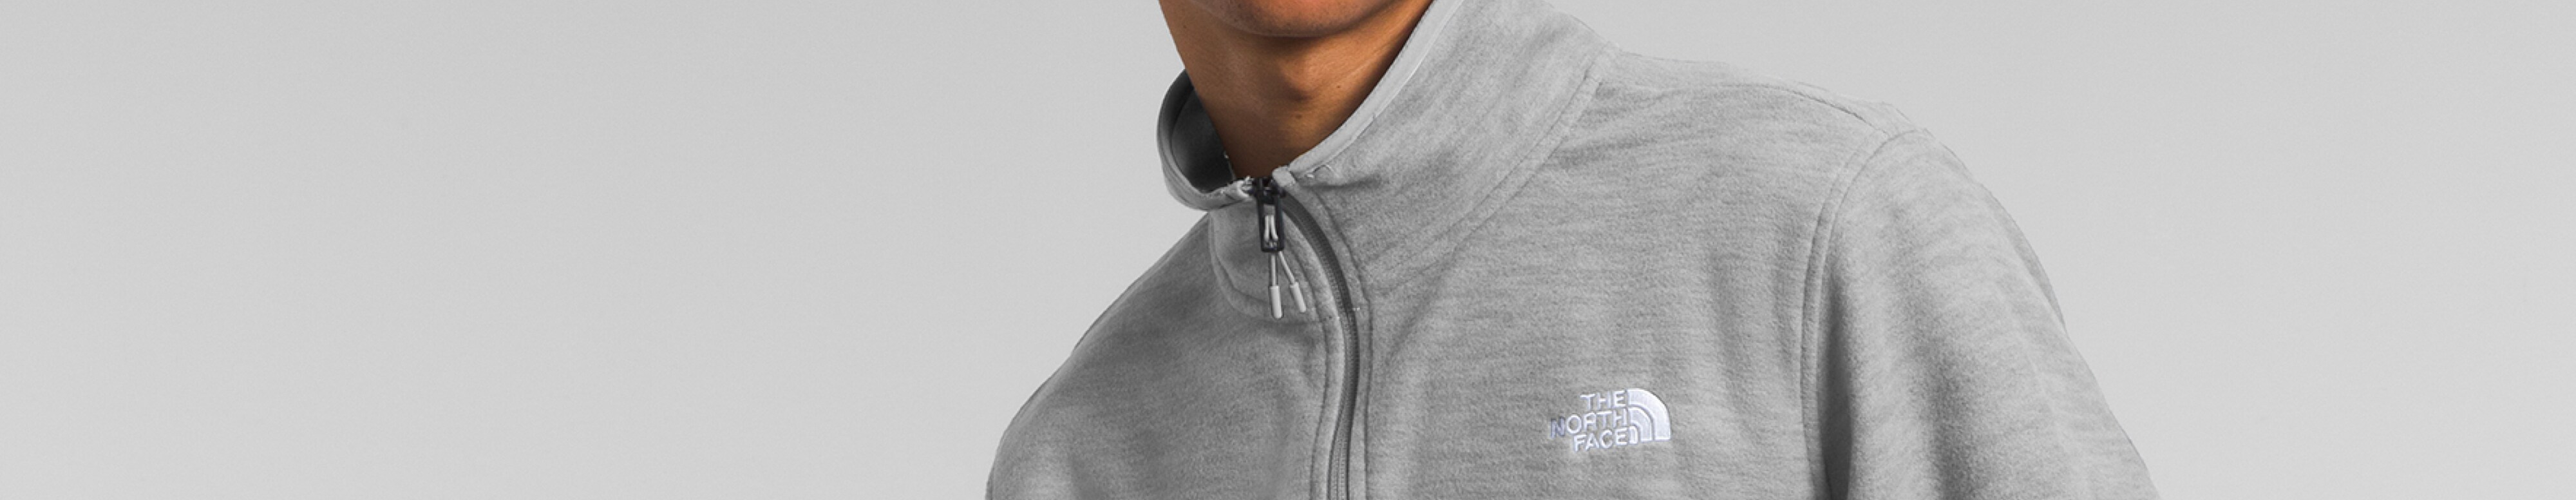 Studio shot of a man in a gray fleece from The North Face. 